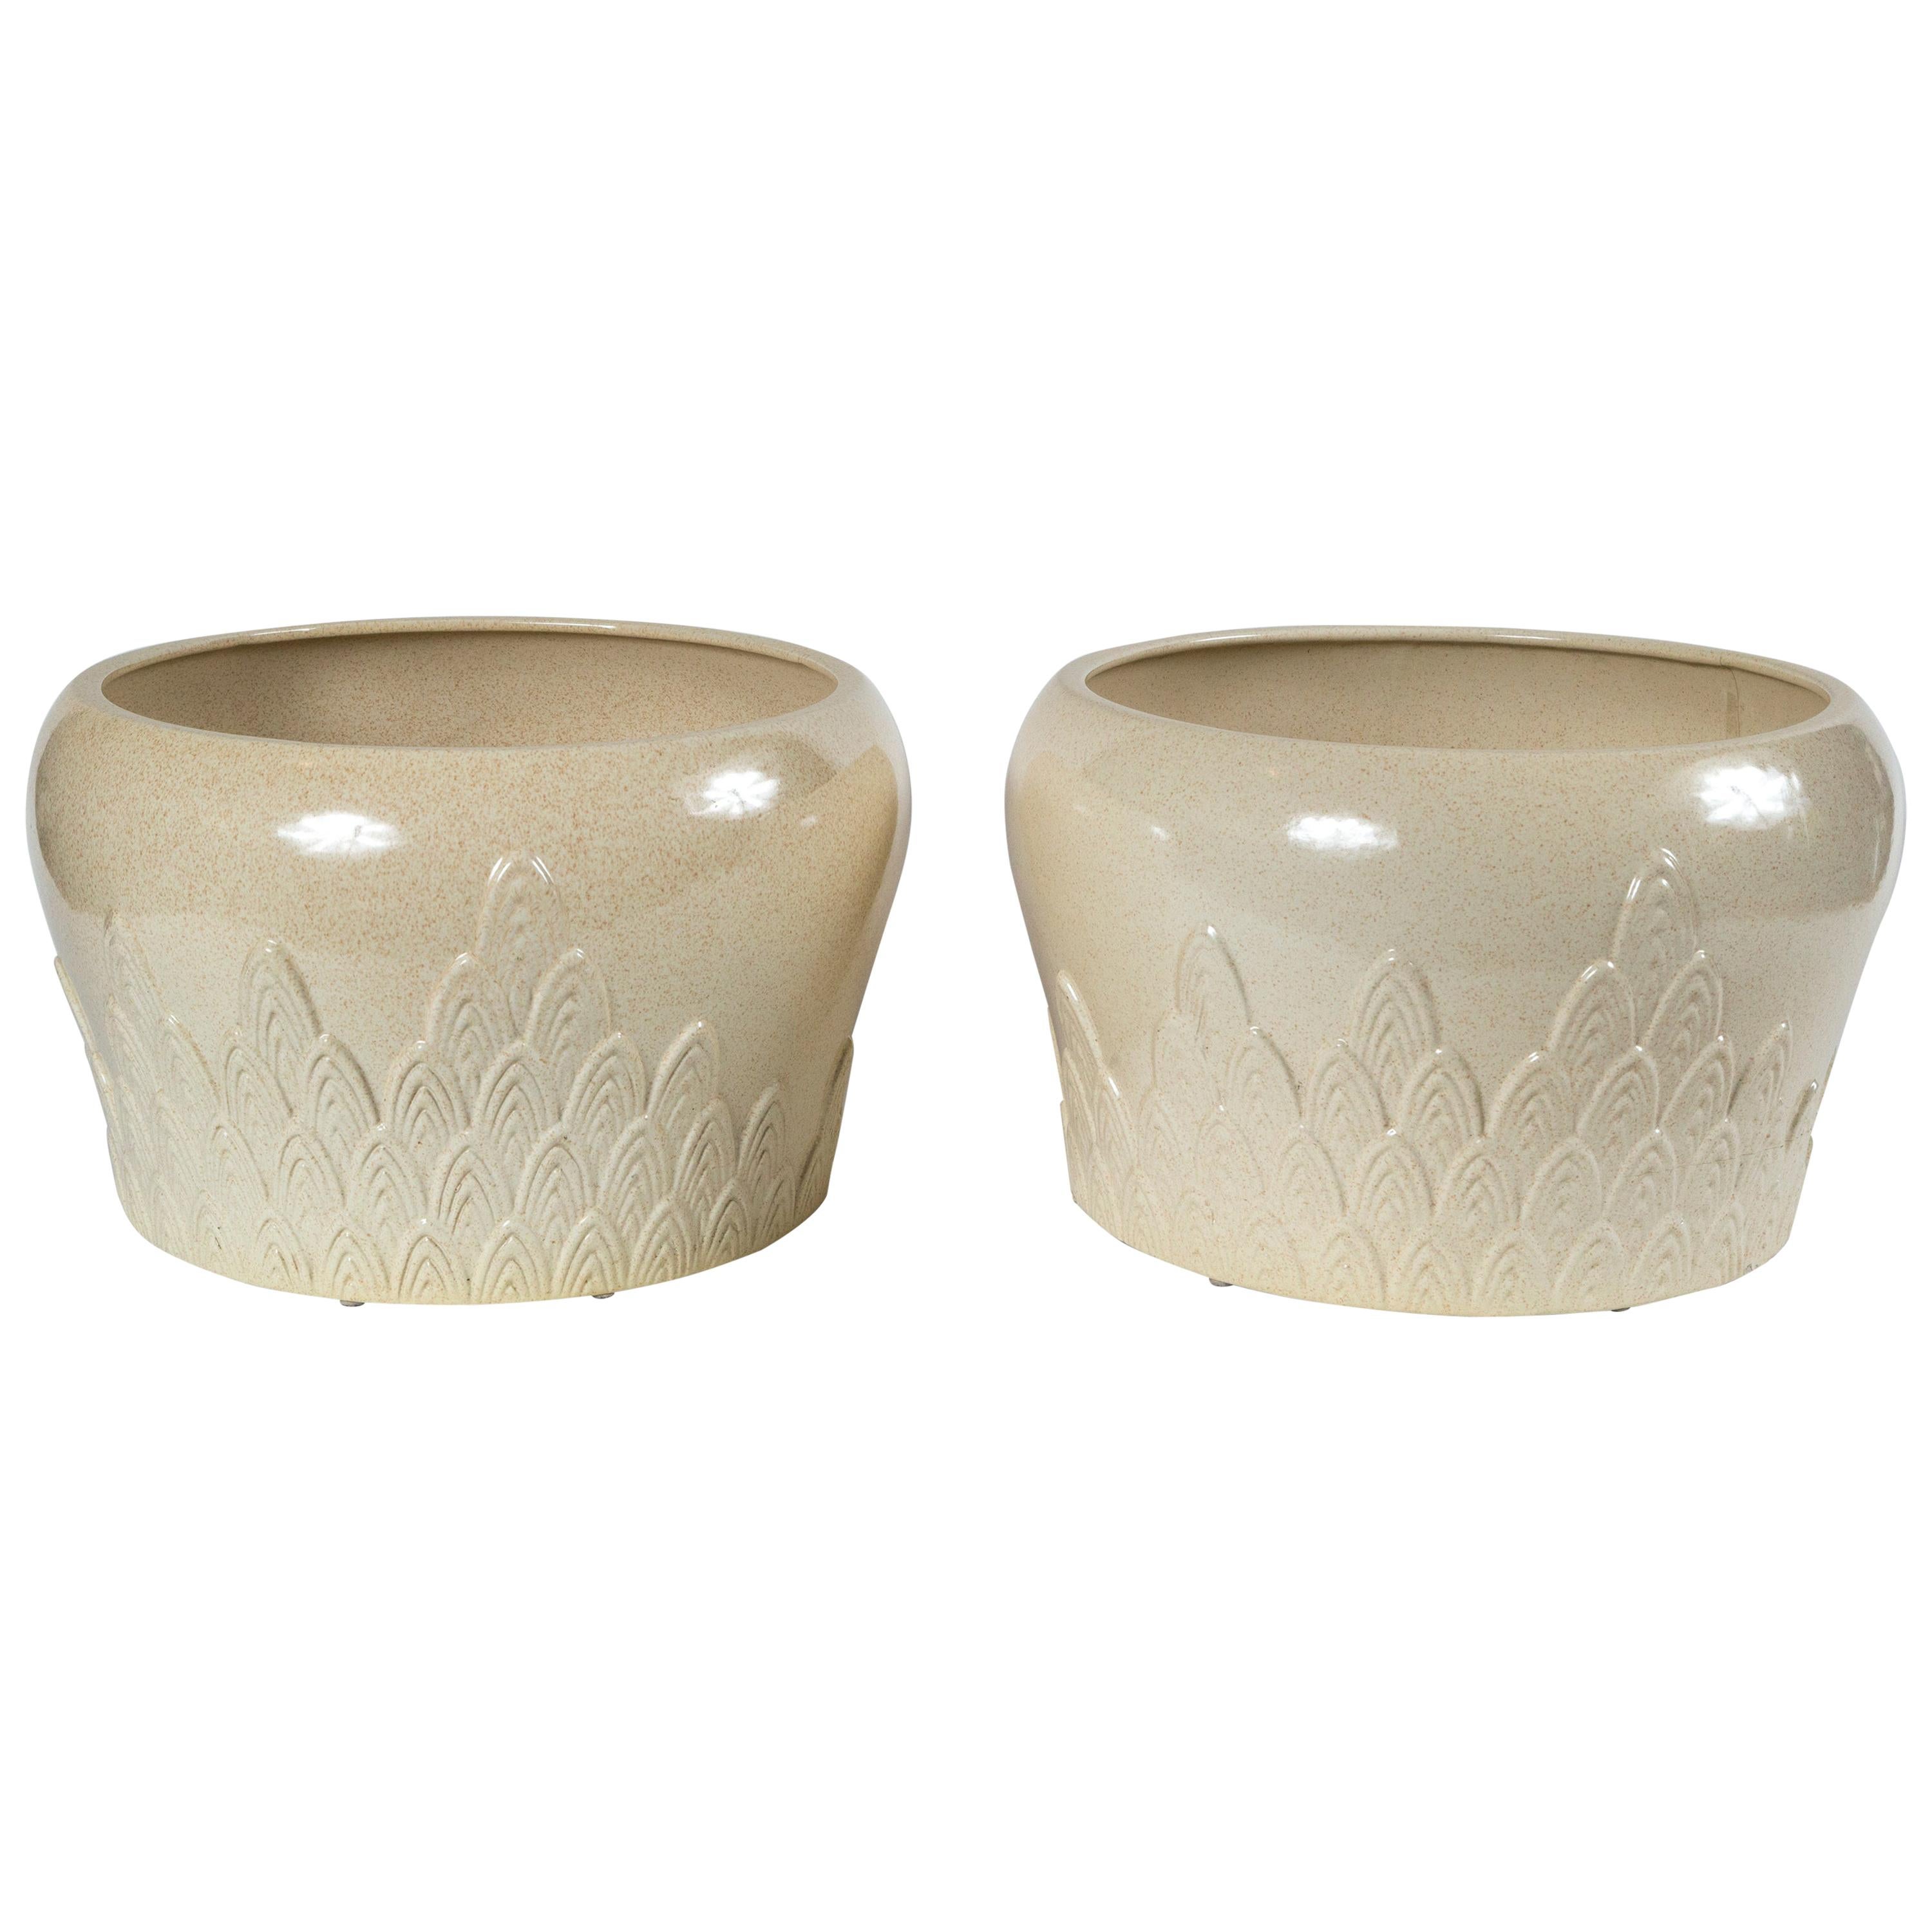 Pair of Ceramic Planters, Tommaso Barbi, Italy, Mid-20th Century For Sale